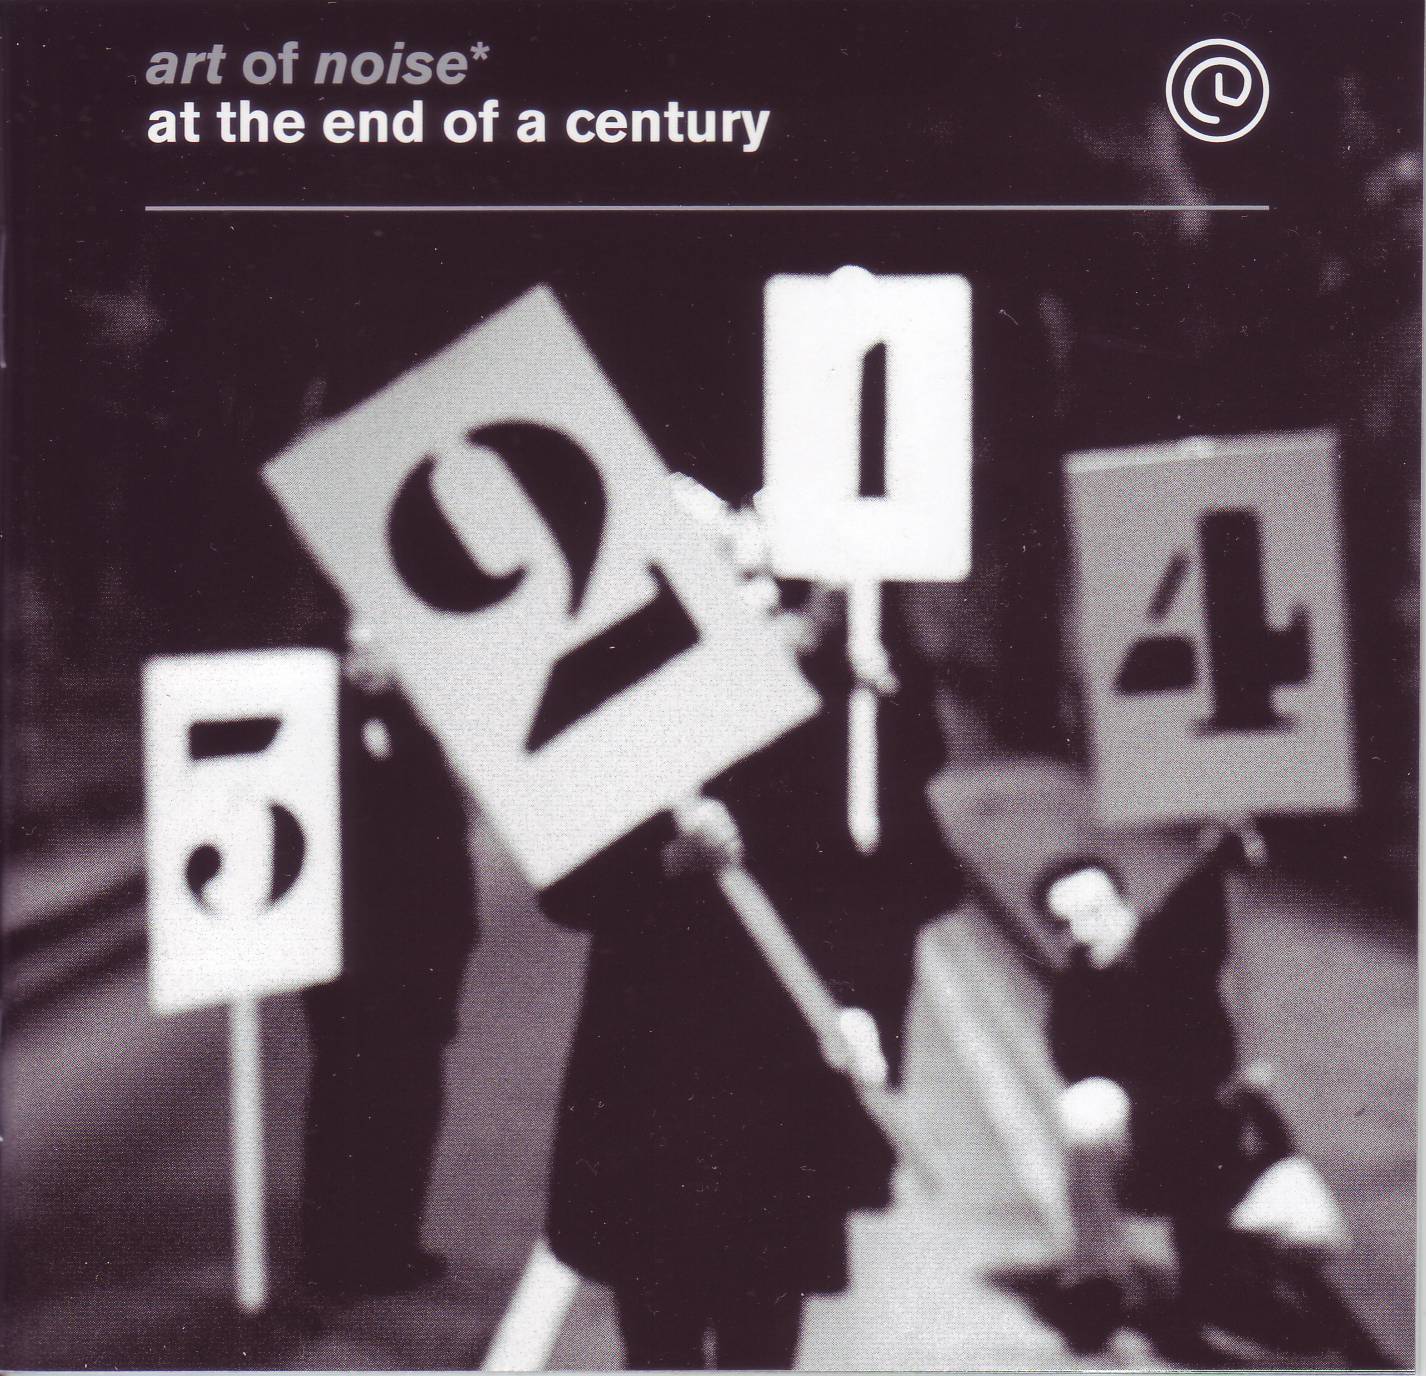 Art of noise - 2015 - At The End Of A Century